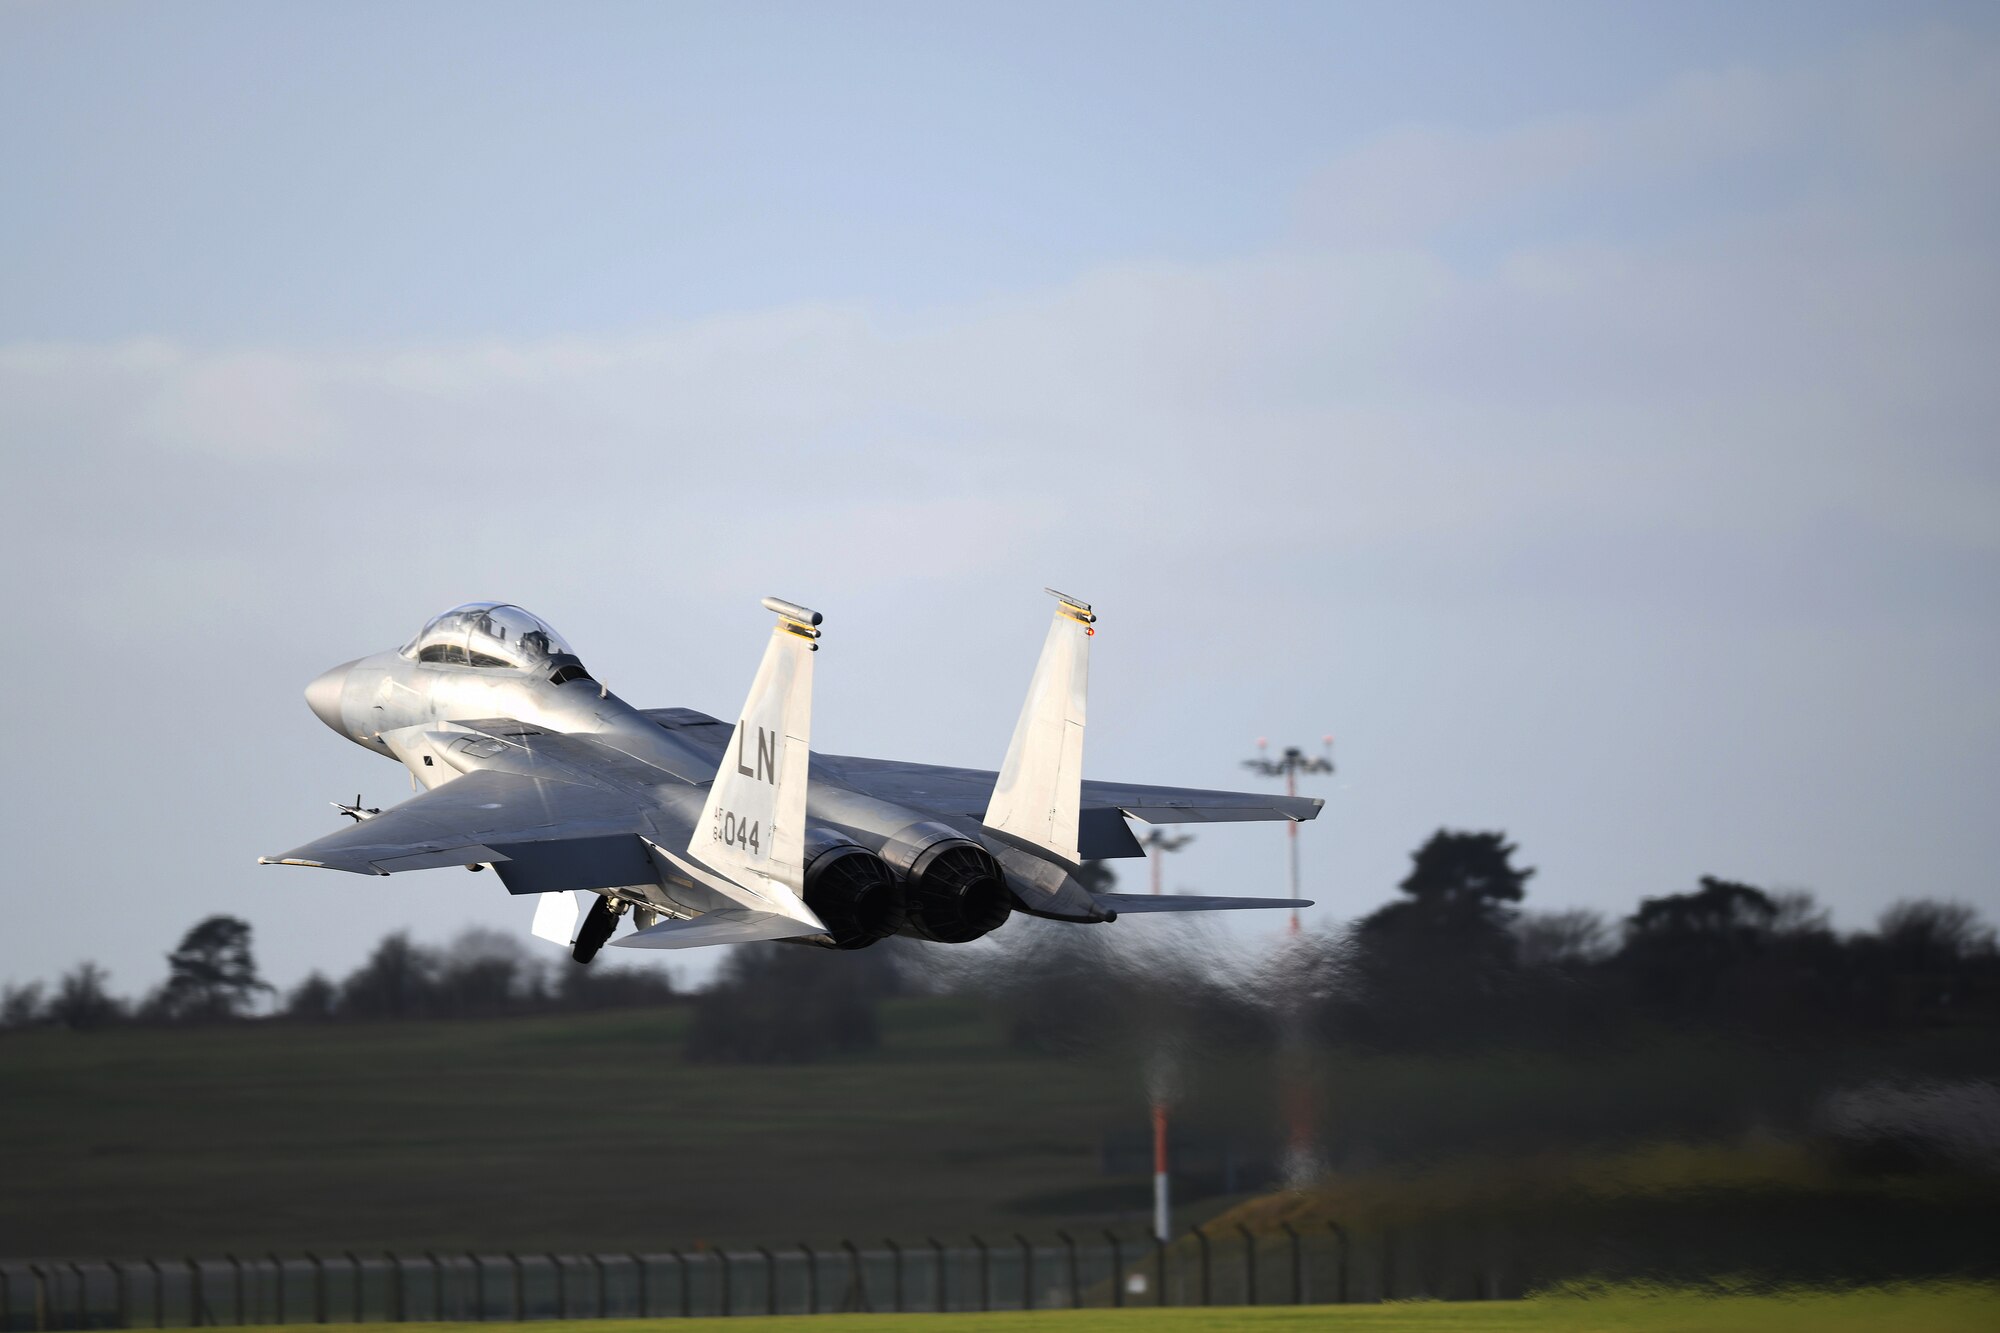 An F-15C Eagle carrying Civil Air Patrol Cadet Zane Fockler, Mildenhall Cadet Squadron cadet, takes off for a familiarization flight at Royal Air Force Lakenheath, England, January 10, 2019. Flockler was awarded the highest prestigious award in the Civil Air Patrol, the Gen. Carl A. Spaatz Award for demonstrating excellence in leadership, character, fitness, and aerospace education. (U.S.Air Force photo by Senior Airman Shanice Williams-Jones)